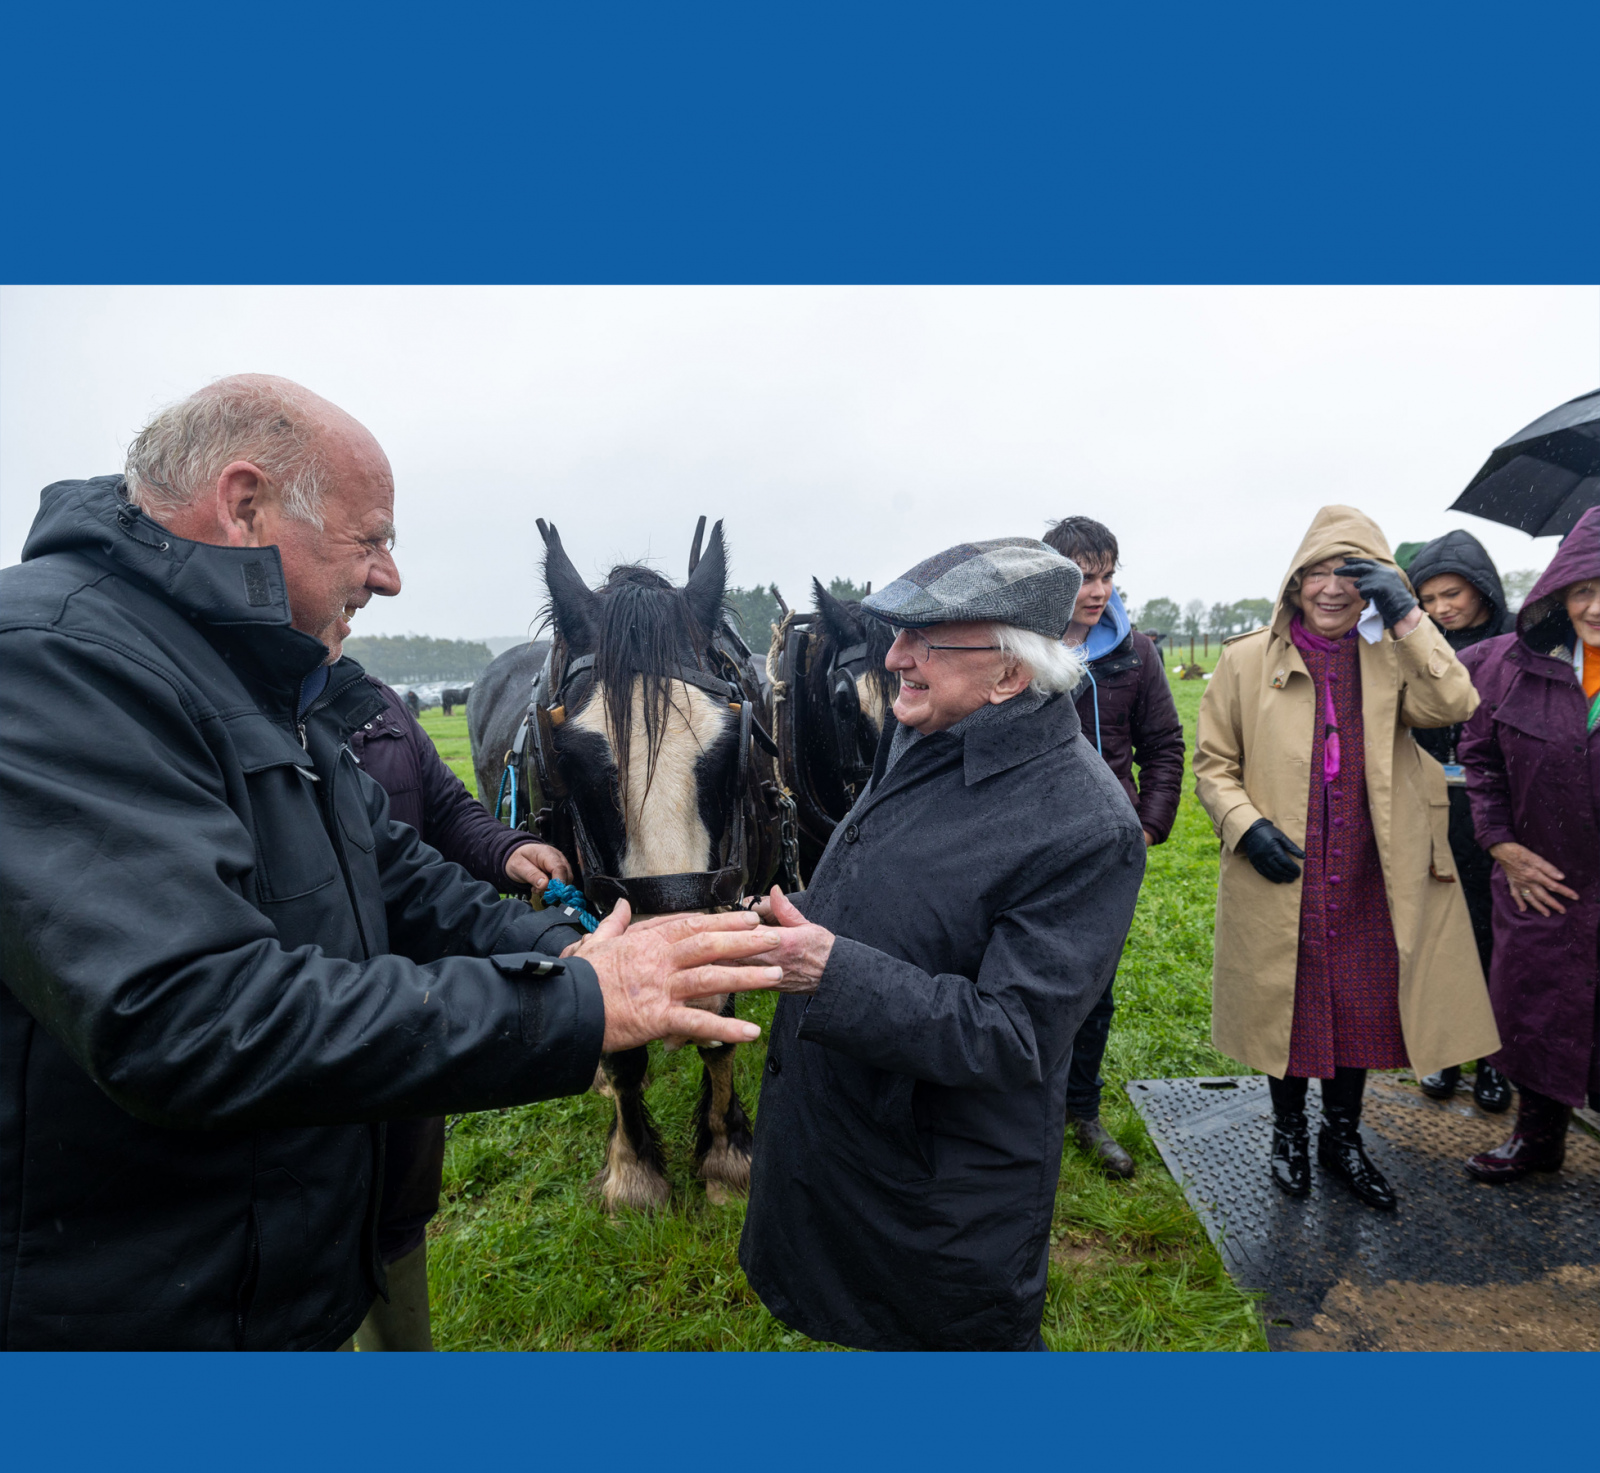 President officially opens the National Ploughing Championships 2023